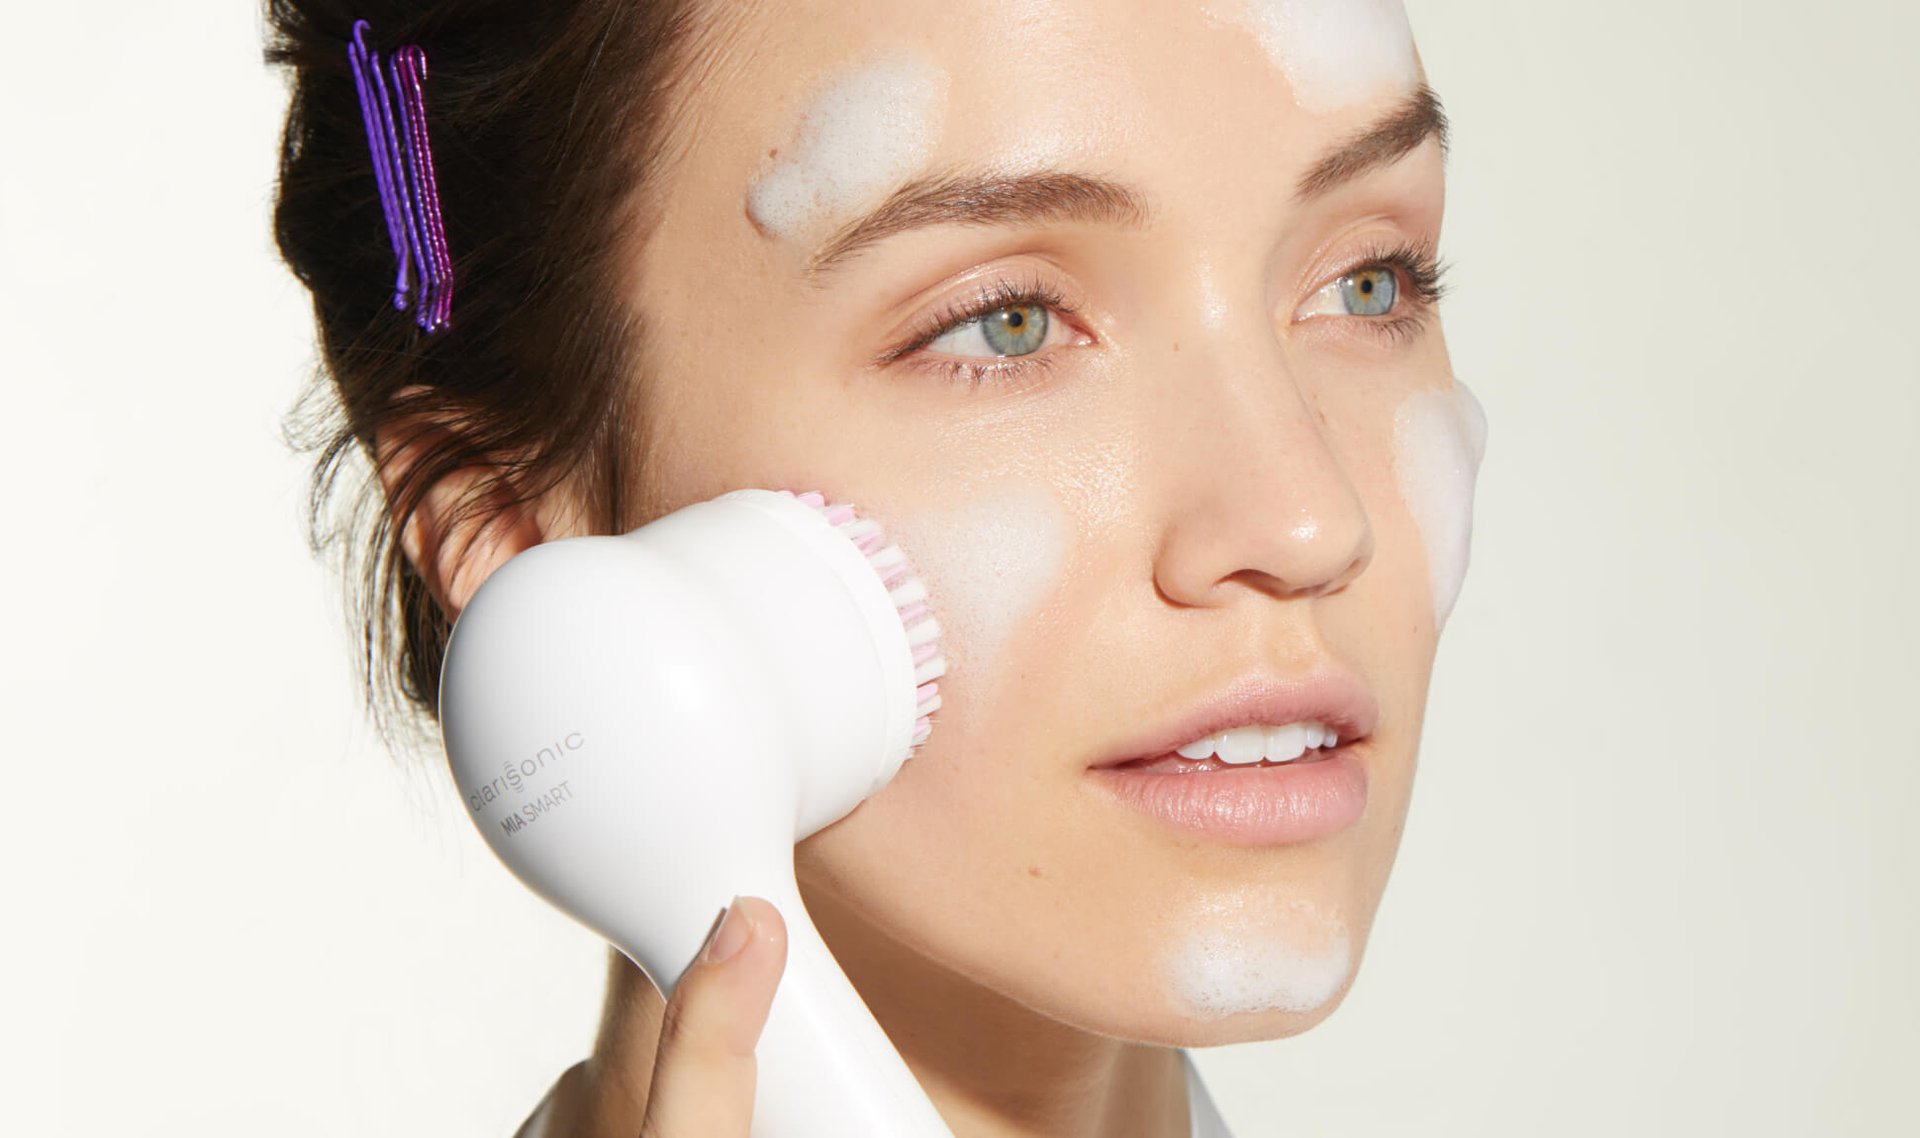 Take Your Cleanse to the Next Level With the Clarisonic Mia Smart